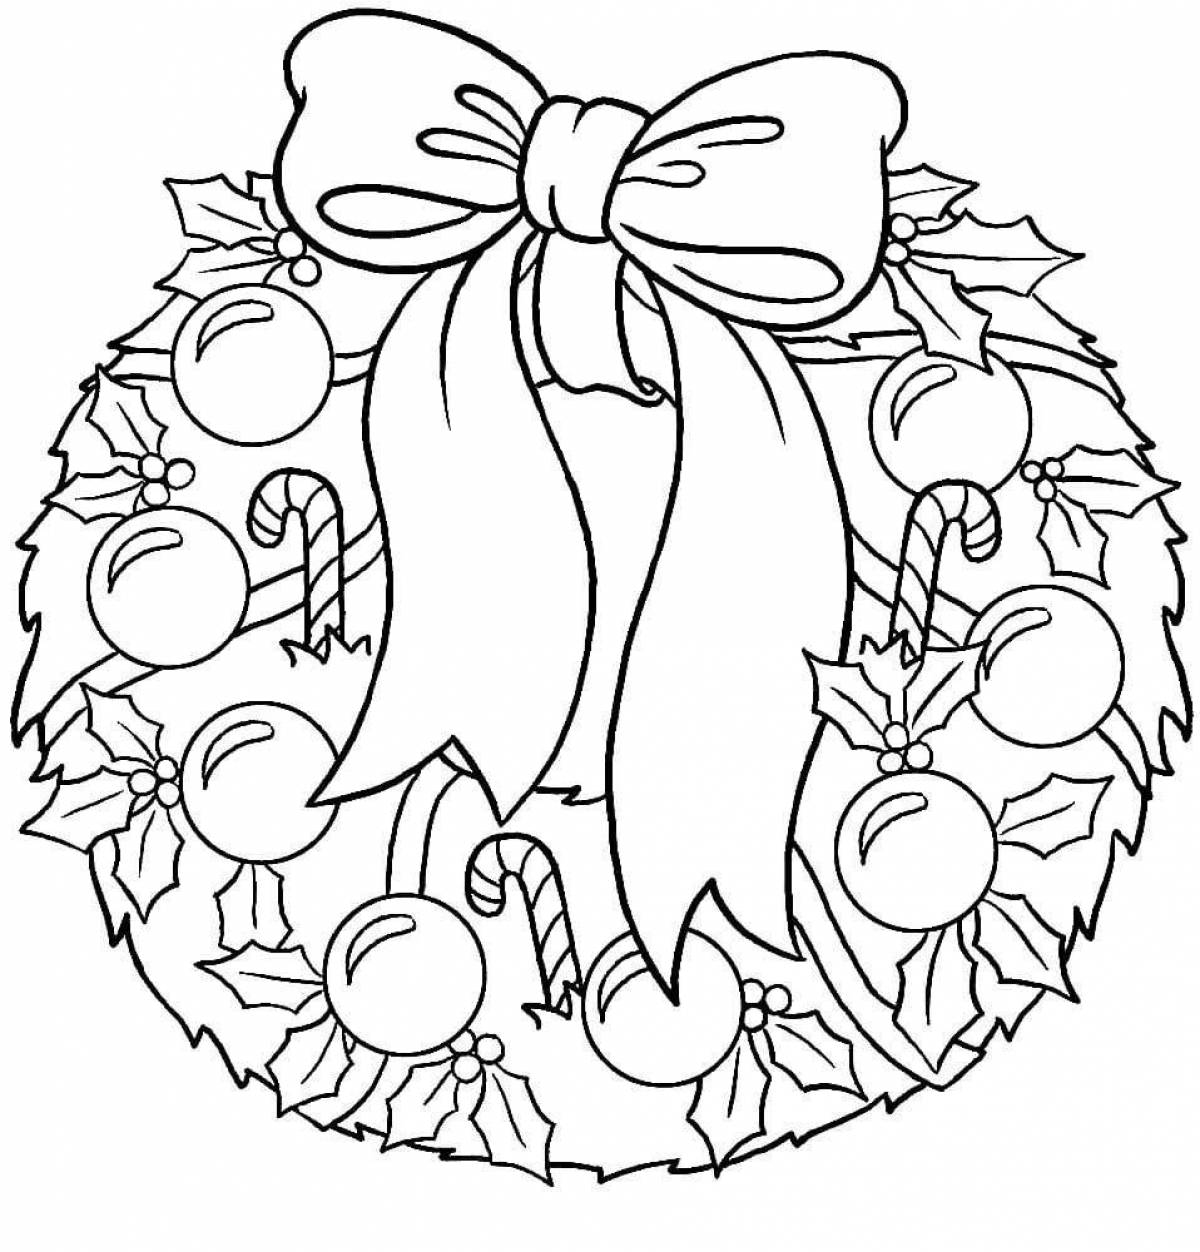 Gorgeous Christmas wreath coloring page